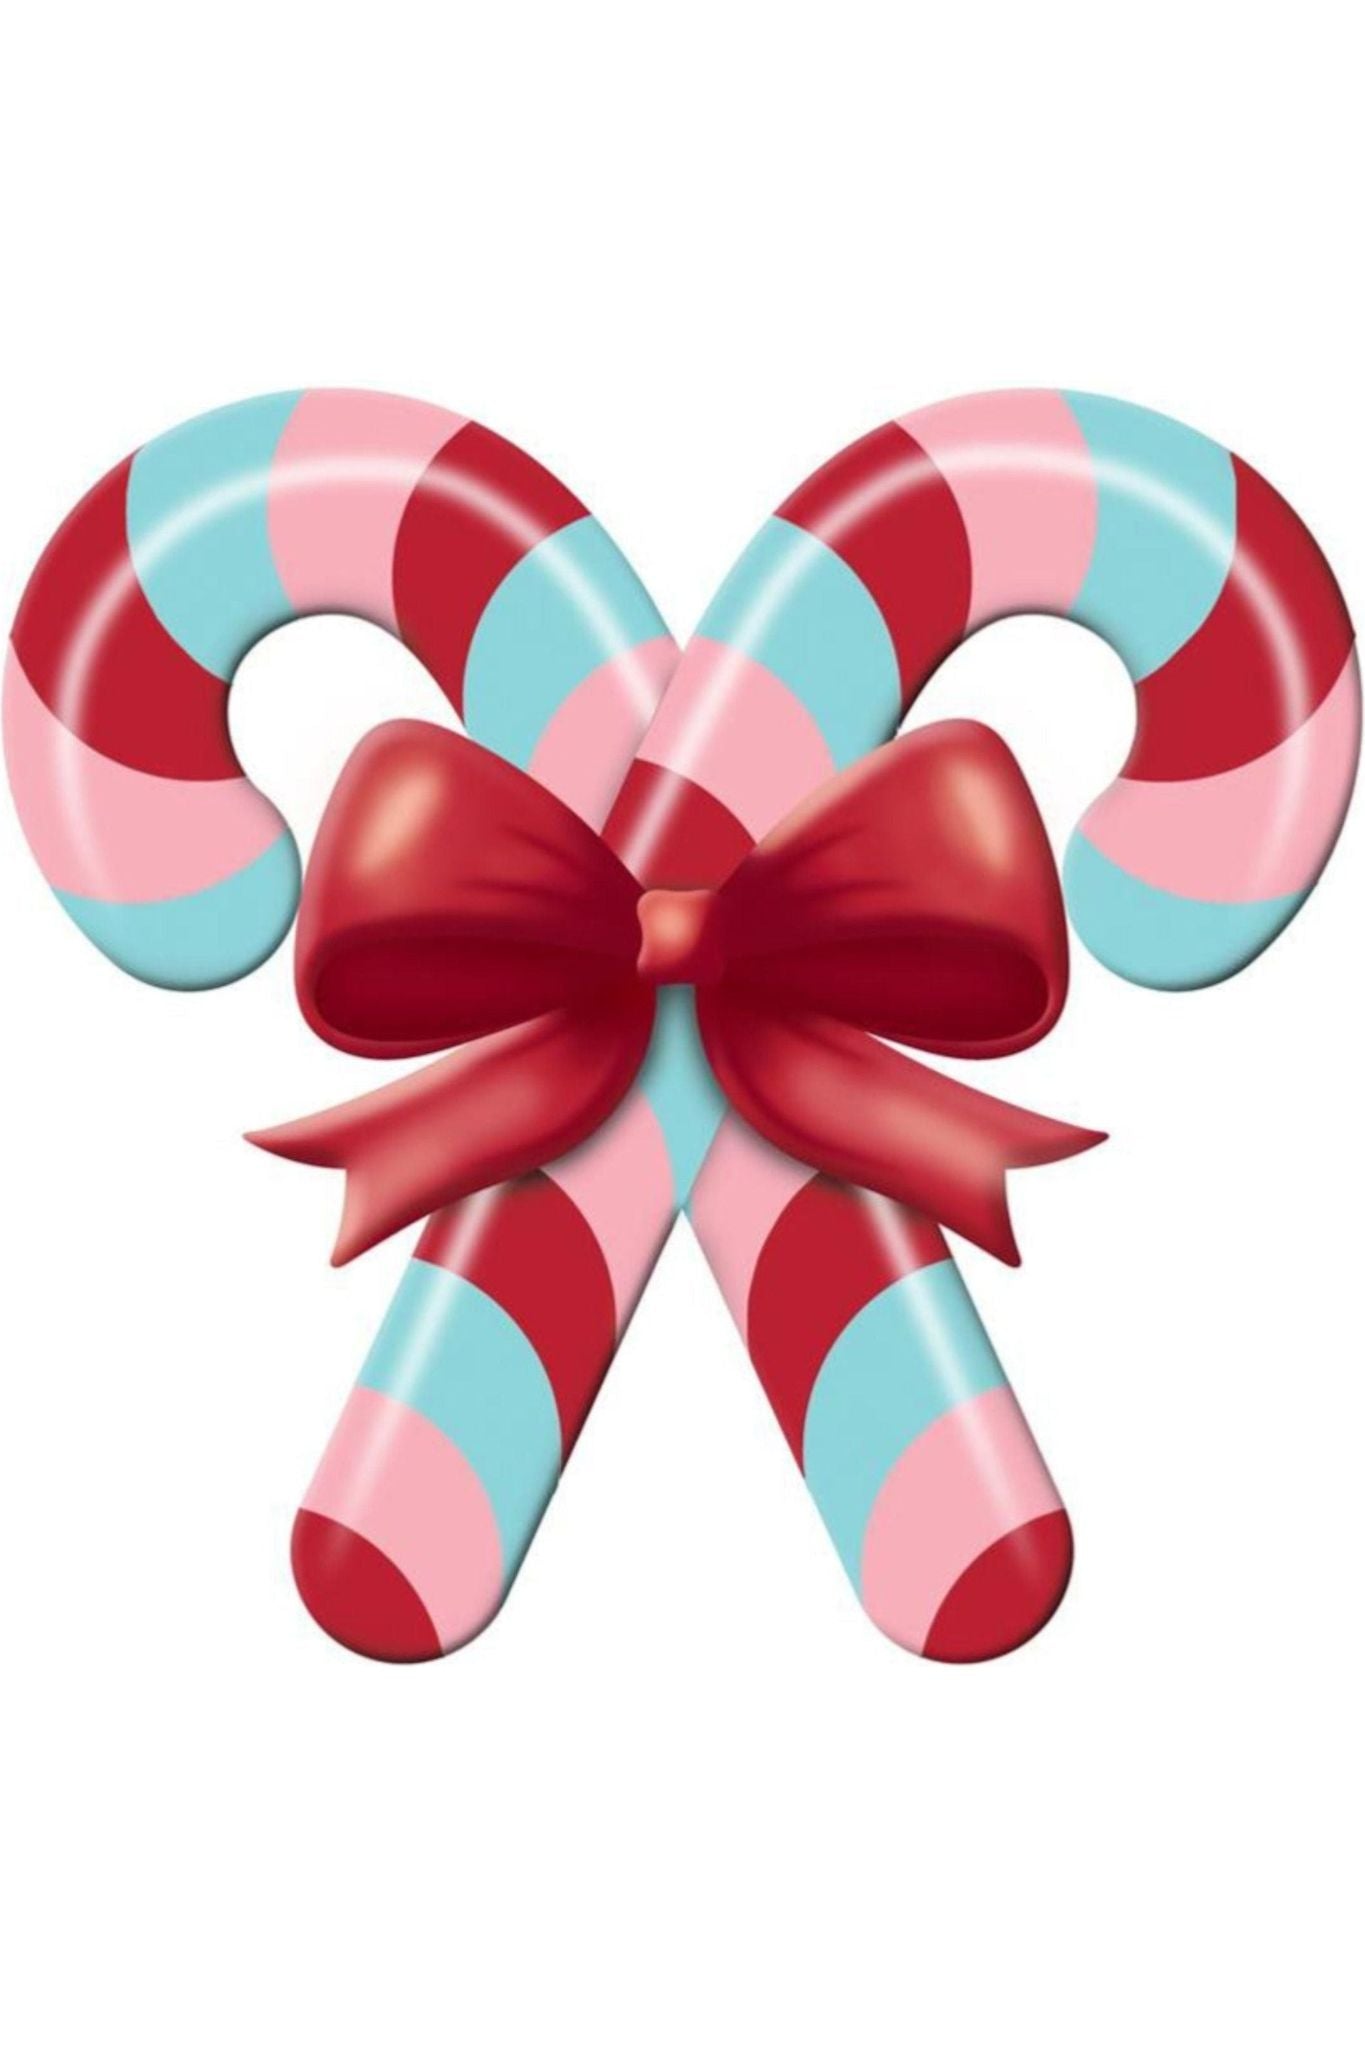 Shop For 13" Metal Embossed Candy Canes: Pink/Ice Blue MD136592